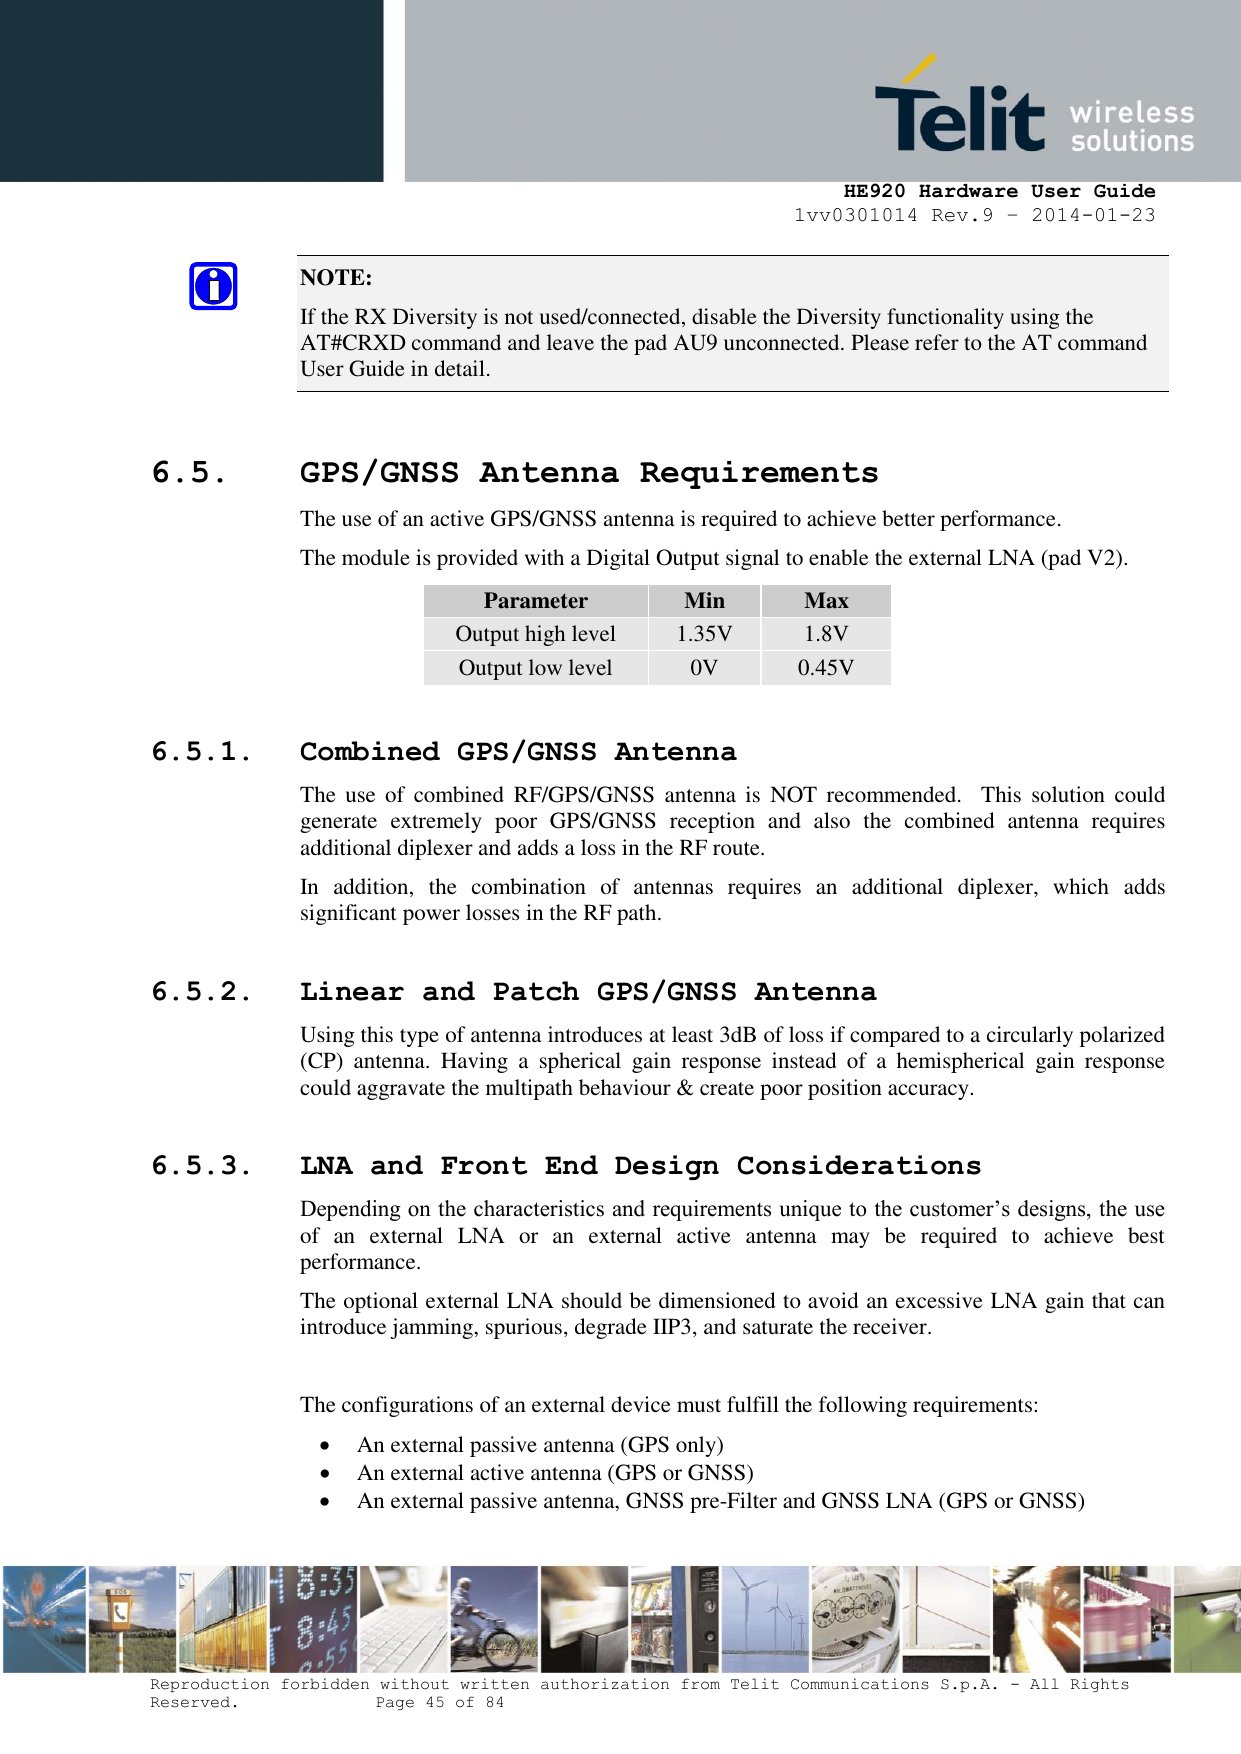     HE920 Hardware User Guide 1vv0301014 Rev.9 – 2014-01-23 Reproduction forbidden without written authorization from Telit Communications S.p.A. - All Rights Reserved.    Page 45 of 84  NOTE:  If the RX Diversity is not used/connected, disable the Diversity functionality using the AT#CRXD command and leave the pad AU9 unconnected. Please refer to the AT command User Guide in detail.  6.5. GPS/GNSS Antenna Requirements The use of an active GPS/GNSS antenna is required to achieve better performance. The module is provided with a Digital Output signal to enable the external LNA (pad V2). Parameter Min Max Output high level 1.35V 1.8V Output low level 0V 0.45V 6.5.1. Combined GPS/GNSS Antenna The  use  of  combined  RF/GPS/GNSS  antenna  is  NOT recommended.   This  solution  could generate  extremely  poor  GPS/GNSS  reception  and  also  the  combined  antenna  requires additional diplexer and adds a loss in the RF route. In  addition,  the  combination  of  antennas  requires  an  additional  diplexer,  which  adds significant power losses in the RF path. 6.5.2. Linear and Patch GPS/GNSS Antenna Using this type of antenna introduces at least 3dB of loss if compared to a circularly polarized (CP)  antenna.  Having  a  spherical  gain  response  instead  of  a  hemispherical  gain  response could aggravate the multipath behaviour &amp; create poor position accuracy. 6.5.3. LNA and Front End Design Considerations Depending on the characteristics and requirements unique to the customer’s designs, the use of  an  external  LNA  or  an  external  active  antenna  may  be  required  to  achieve  best performance. The optional external LNA should be dimensioned to avoid an excessive LNA gain that can introduce jamming, spurious, degrade IIP3, and saturate the receiver.  The configurations of an external device must fulfill the following requirements:  An external passive antenna (GPS only)  An external active antenna (GPS or GNSS)  An external passive antenna, GNSS pre-Filter and GNSS LNA (GPS or GNSS)  